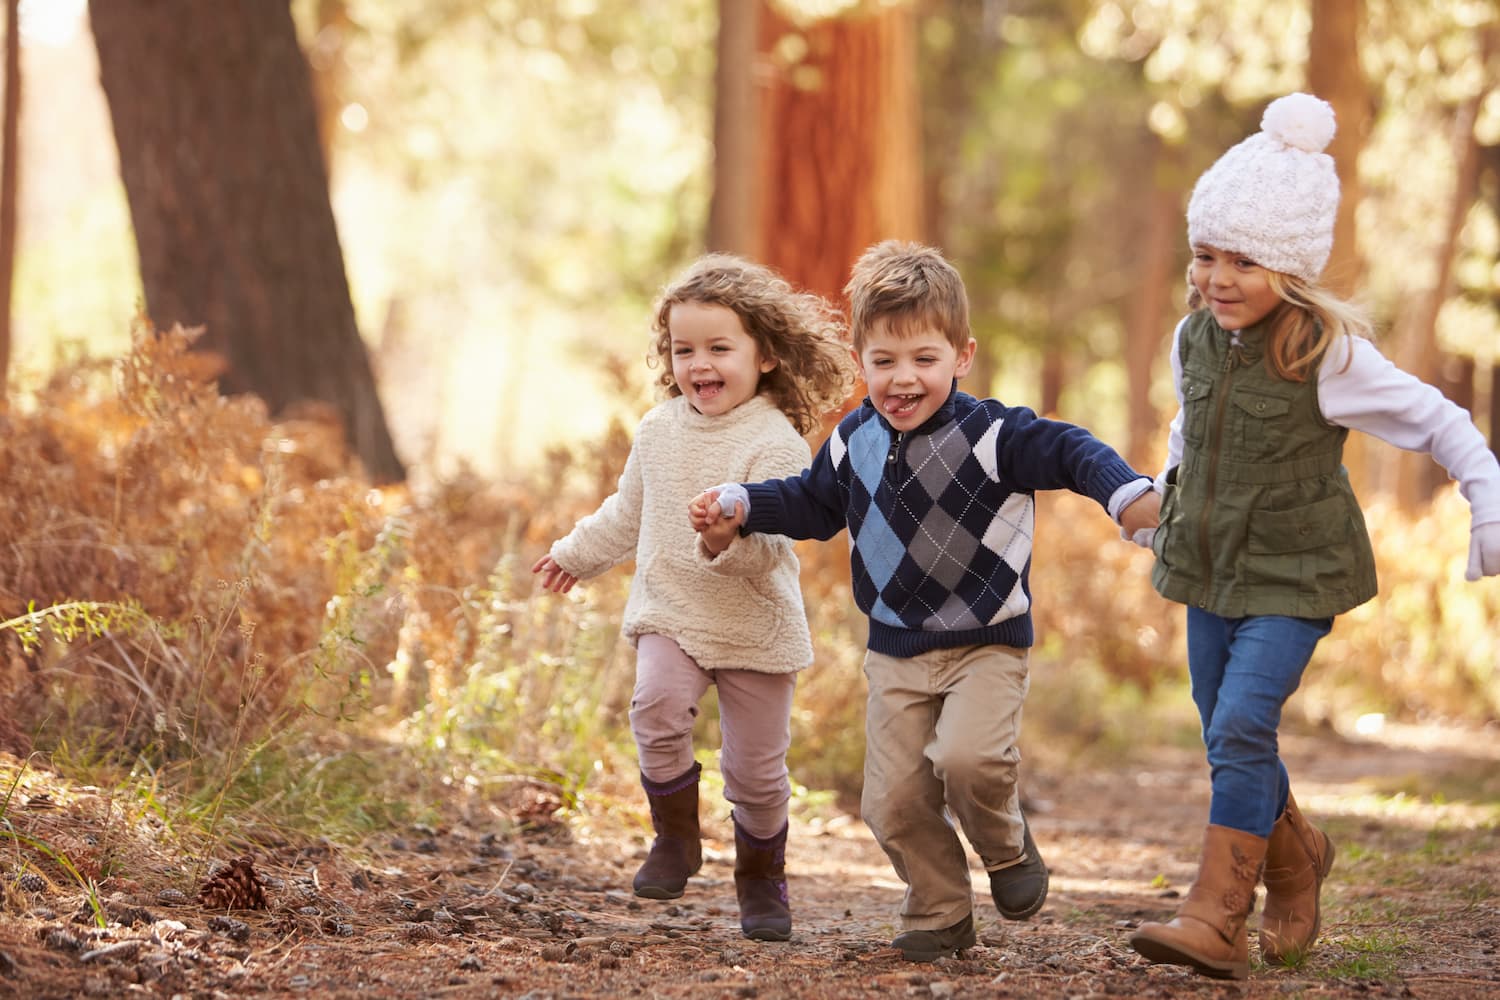 3 children holding hands and running through a wooded area on a sunny day